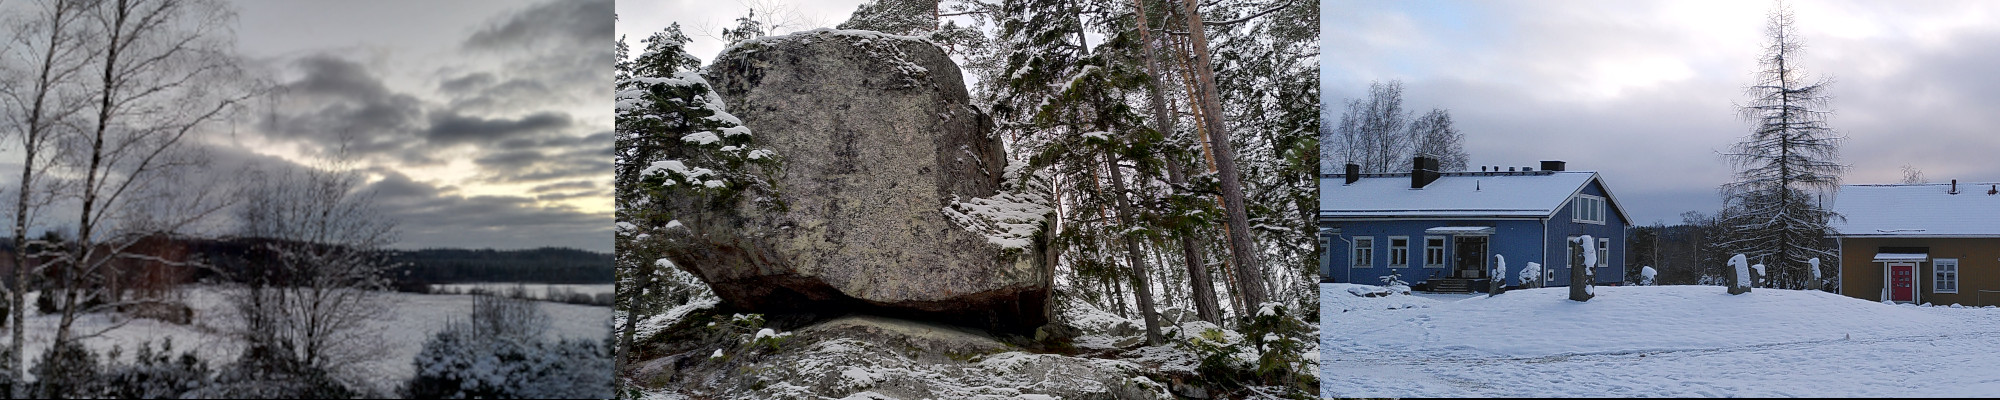 Views of trees, snow, rocks and buildings at Arteles Creative Center in Finland